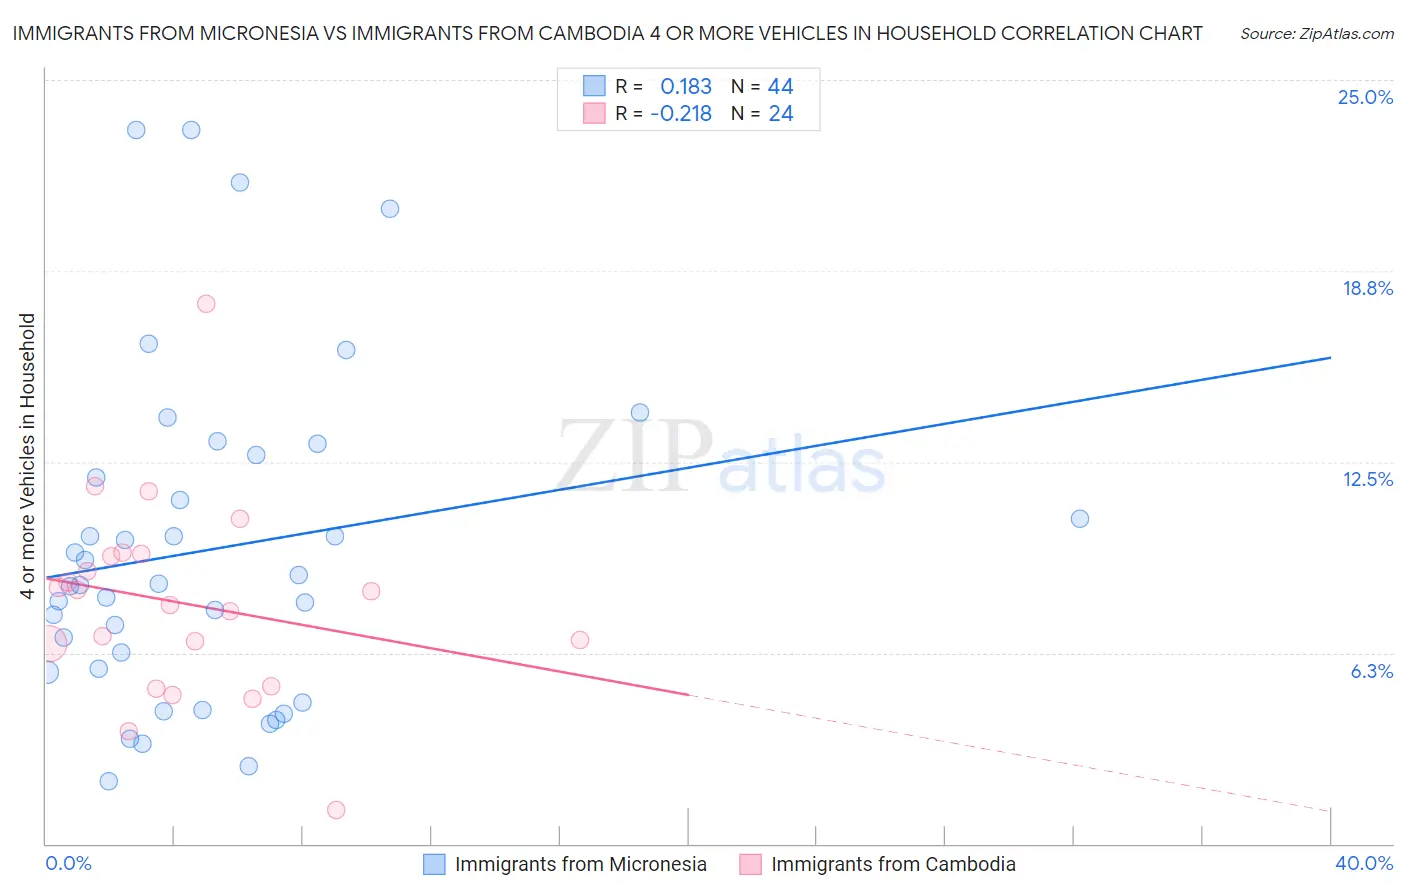 Immigrants from Micronesia vs Immigrants from Cambodia 4 or more Vehicles in Household